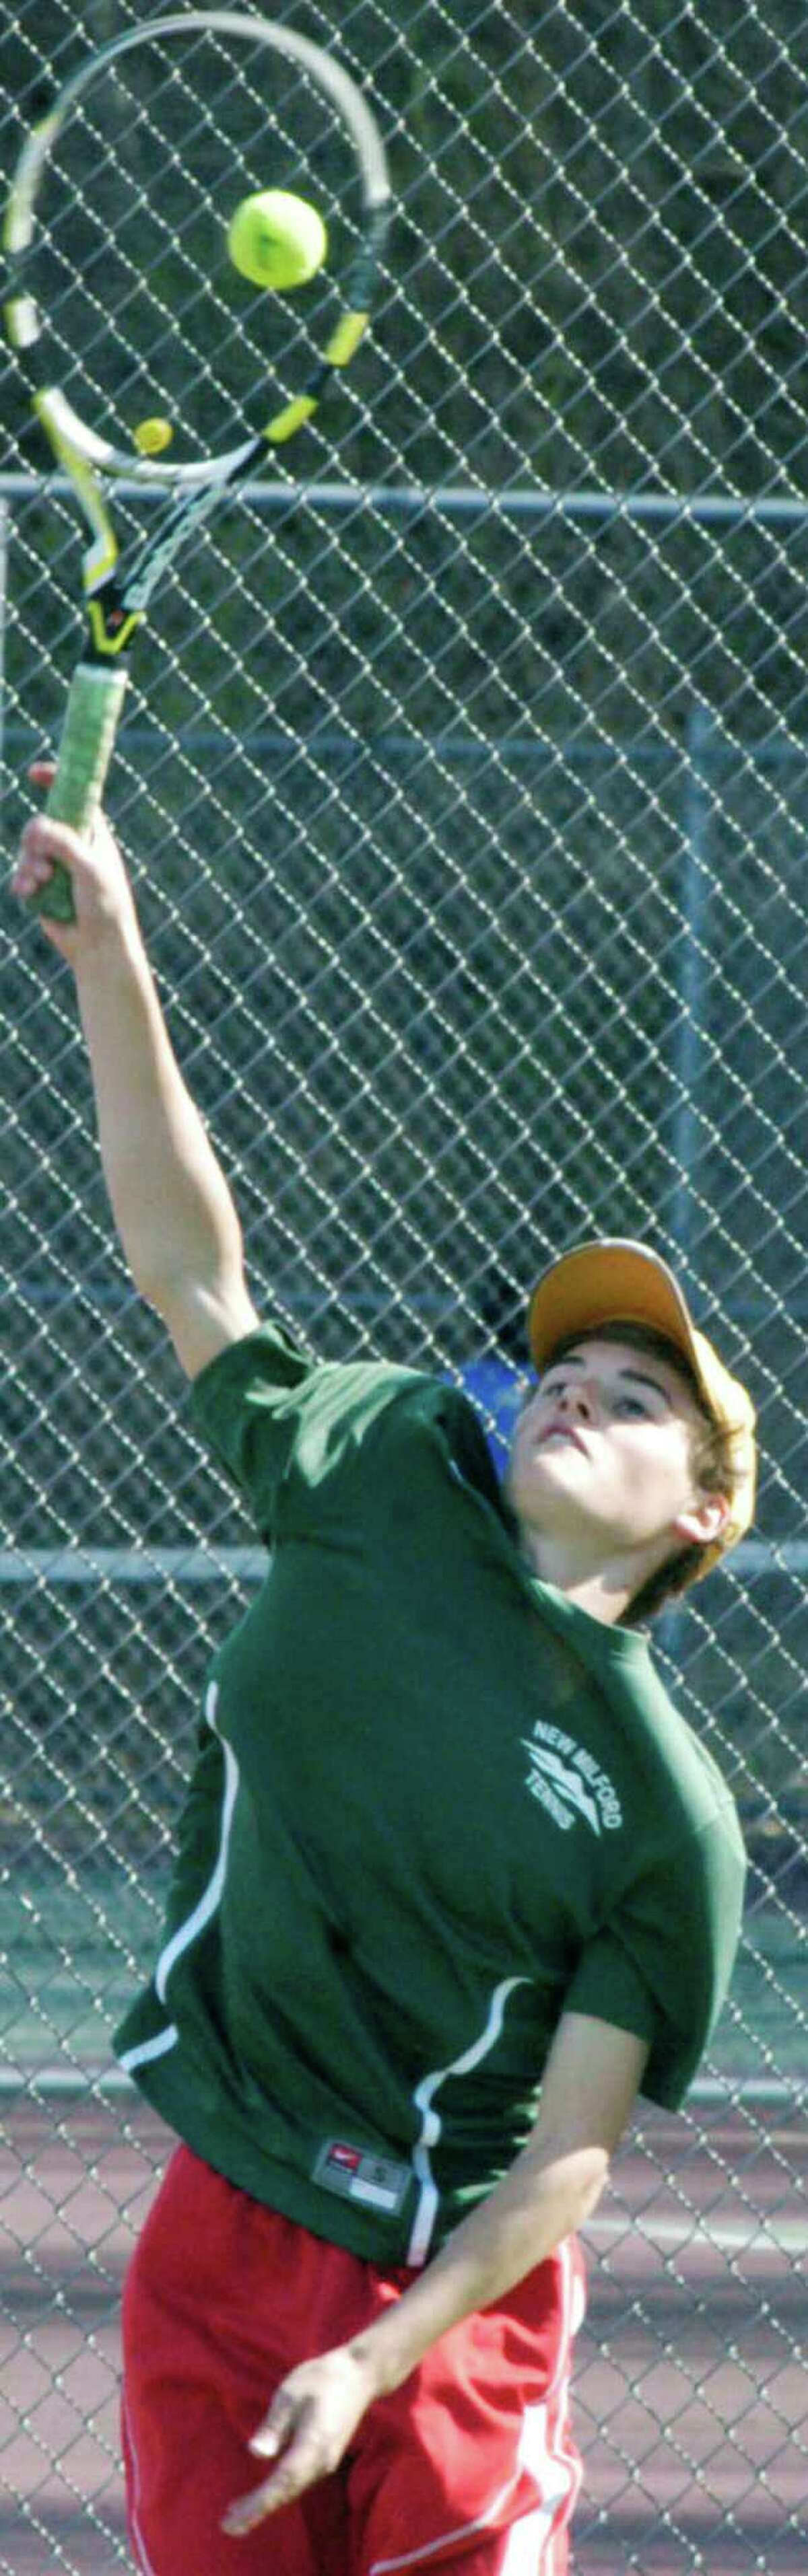 Green Wave sophomore Hunter Berrett finds the sweet spot on the racquet with this serve during a recent New Milford High School boys' tennis match. May 2014